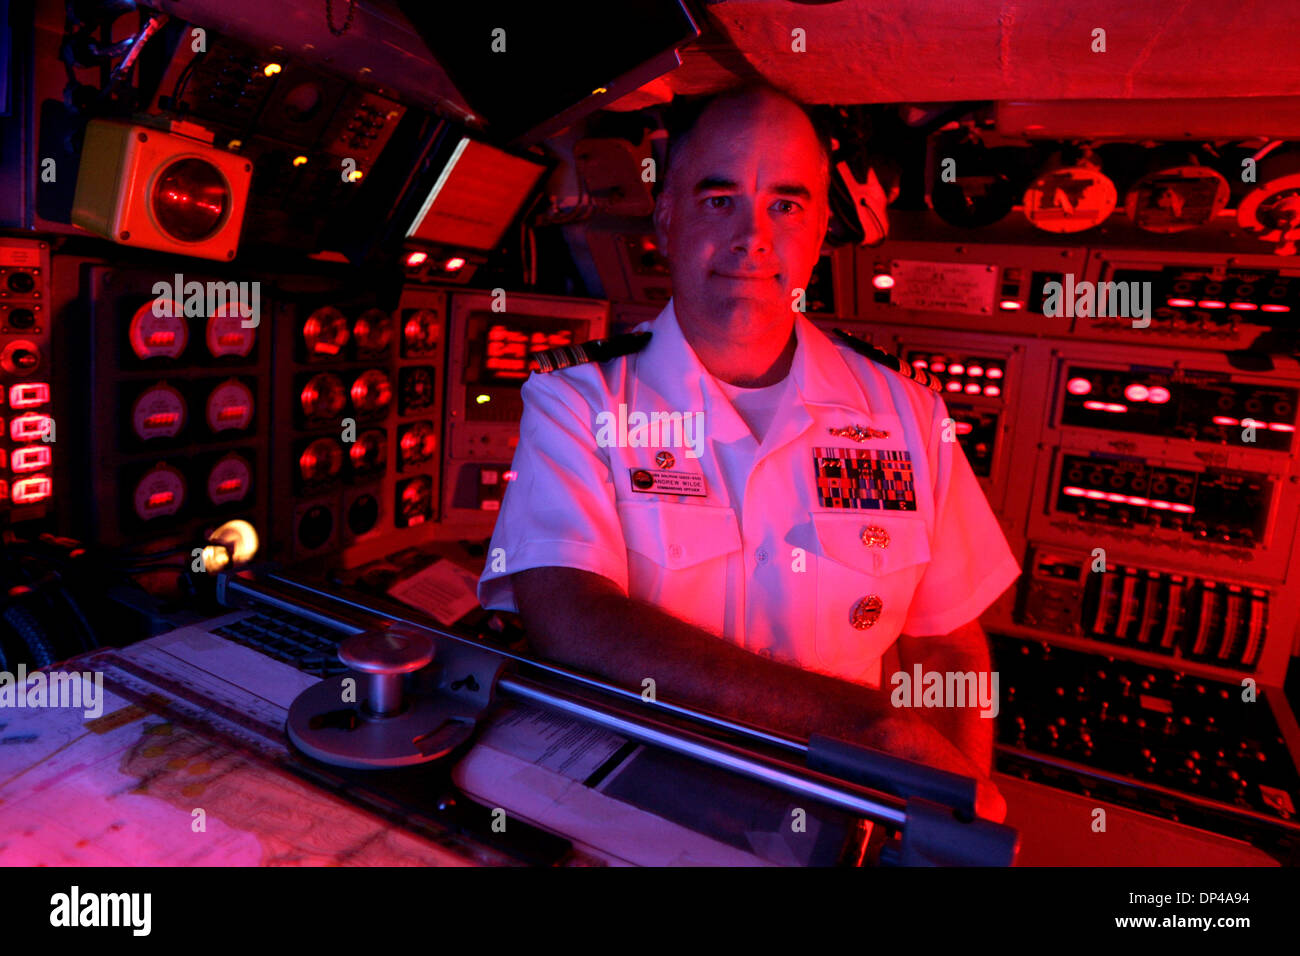 Aug 02, 2006; San Diego, CA, USA; US Navy Commander, ANDREW WILDE, commanding officer of  the USS Dolphin, the US Navy's last Diesel Electric Submarine in the Control Room of the 1960's era sub. The Dolphin call Naval Base Point Loma home and is scheduled to be decommissioned later this year.  The sub recently completed a recent $50 million repair and upgrade. Mandatory Credit: Pho Stock Photo